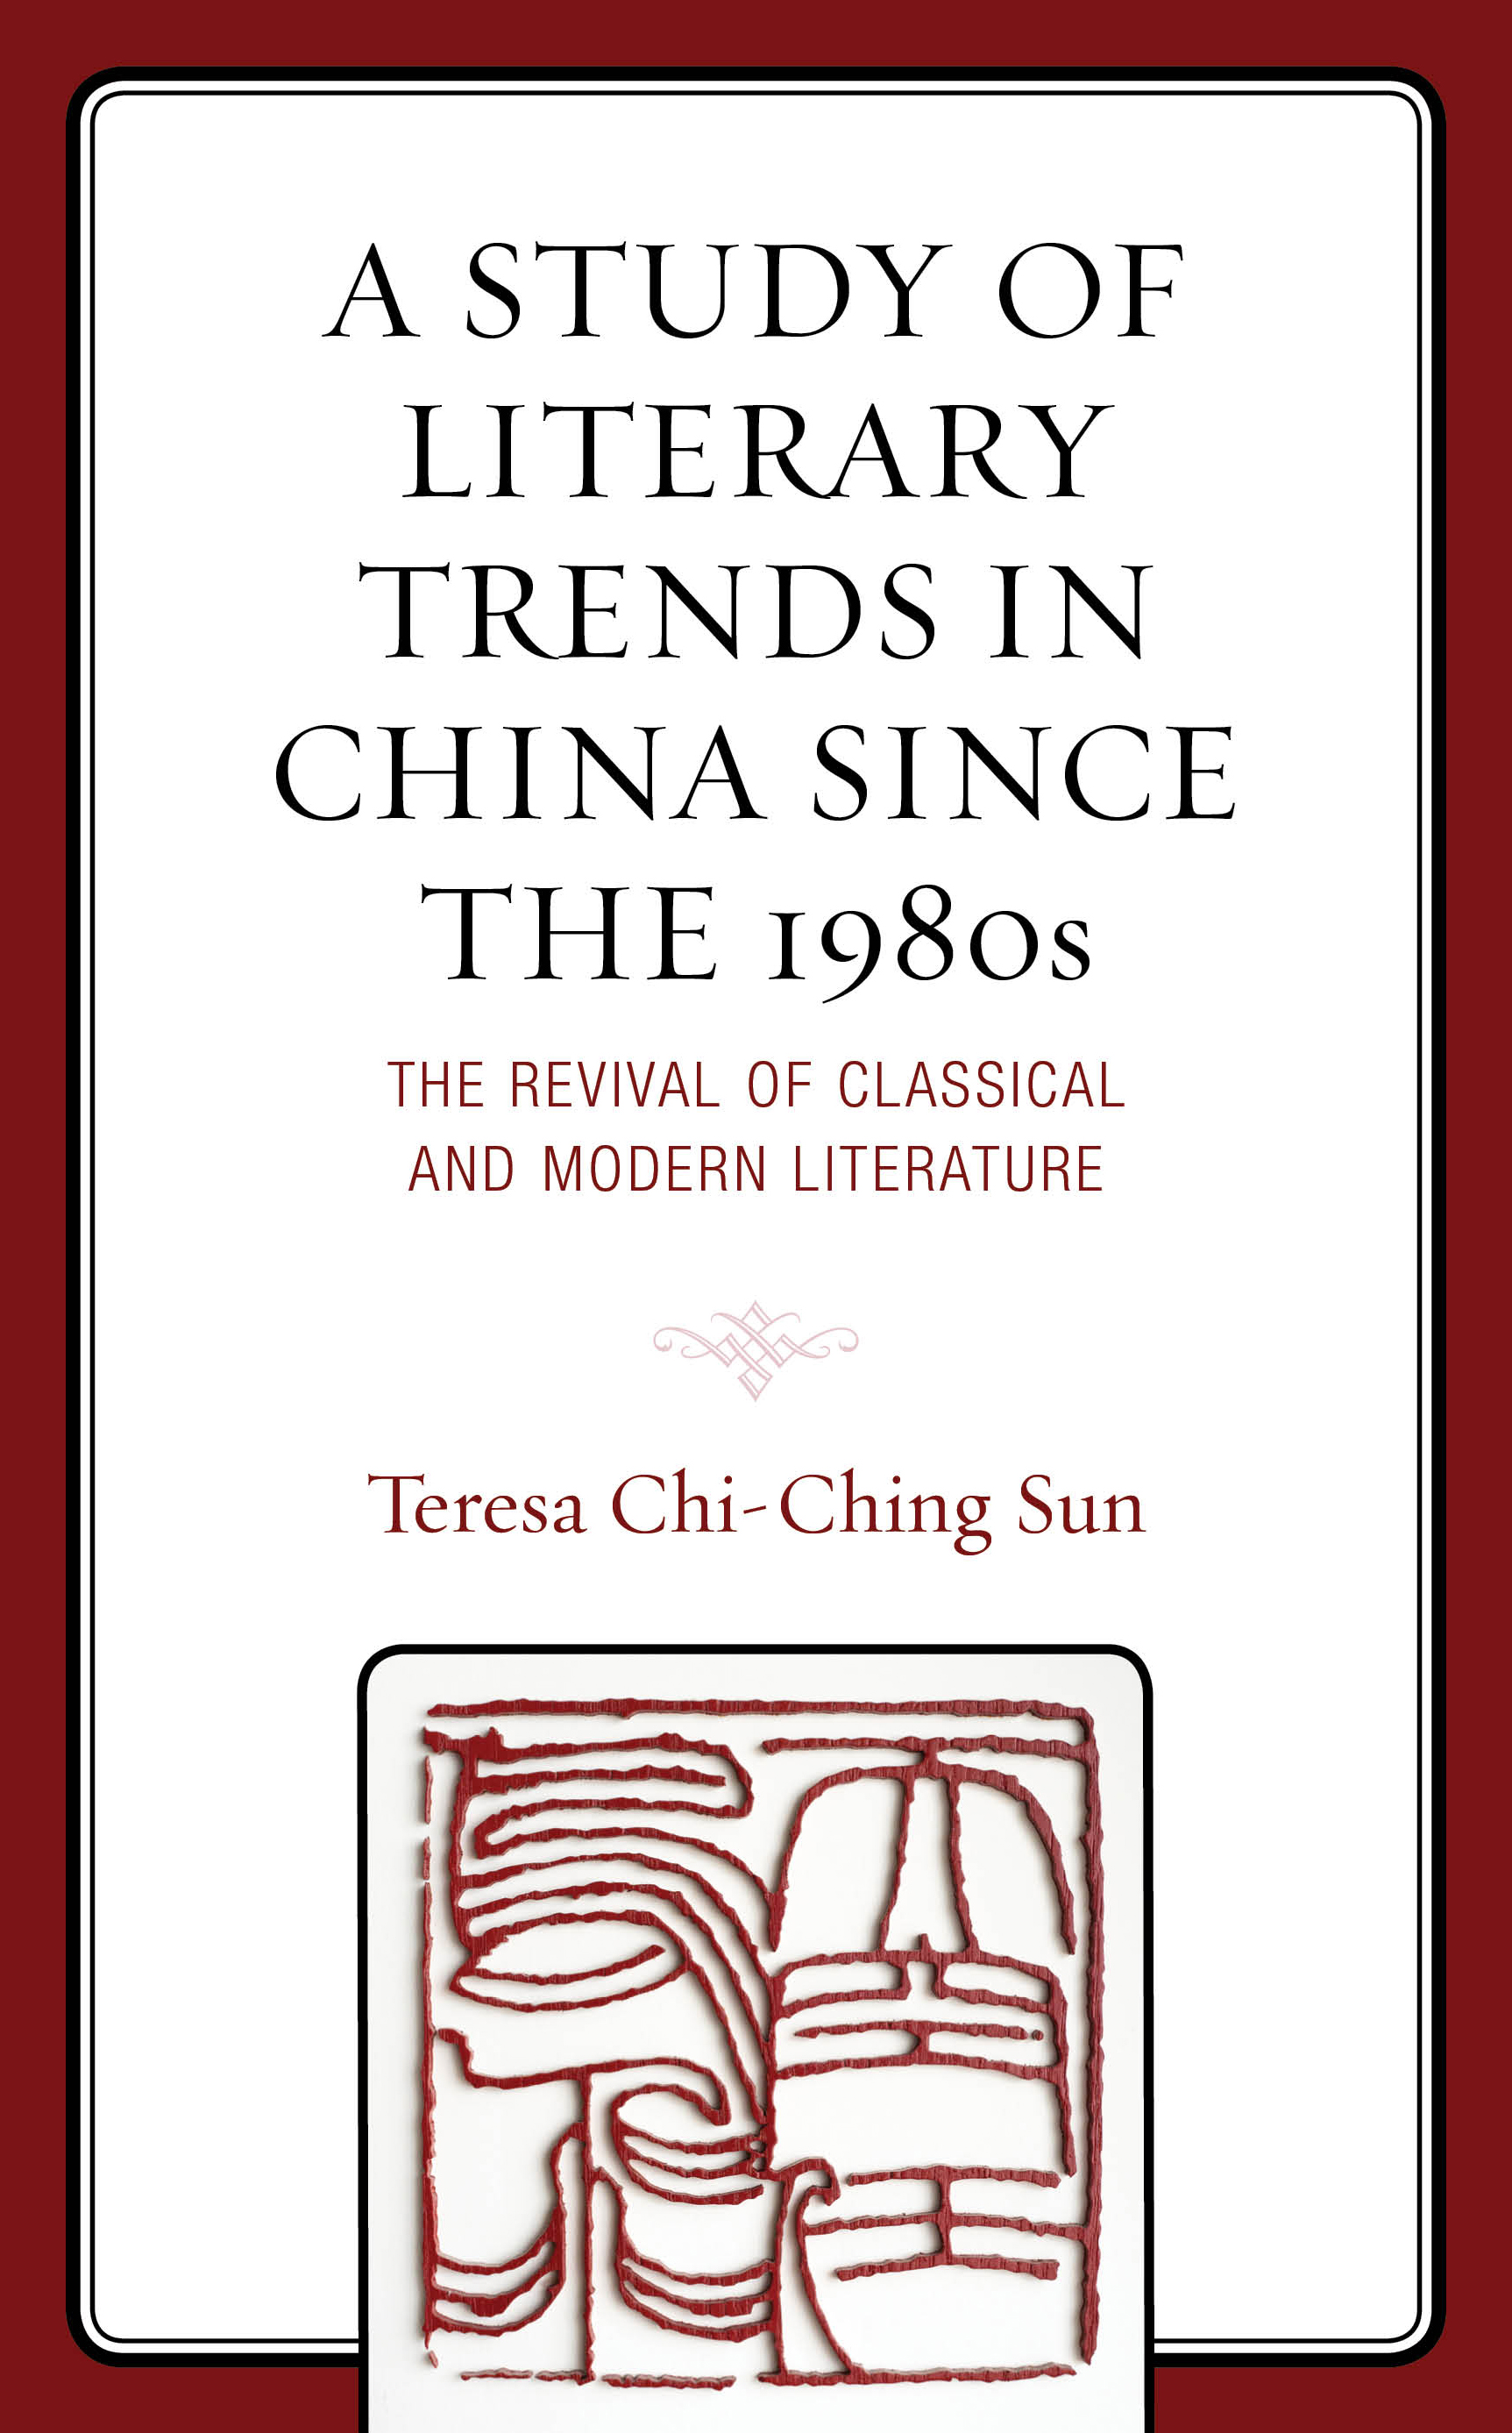 A Study of Literary Trends in China Since the 1980s: The Revival of Classical and Modern Literature